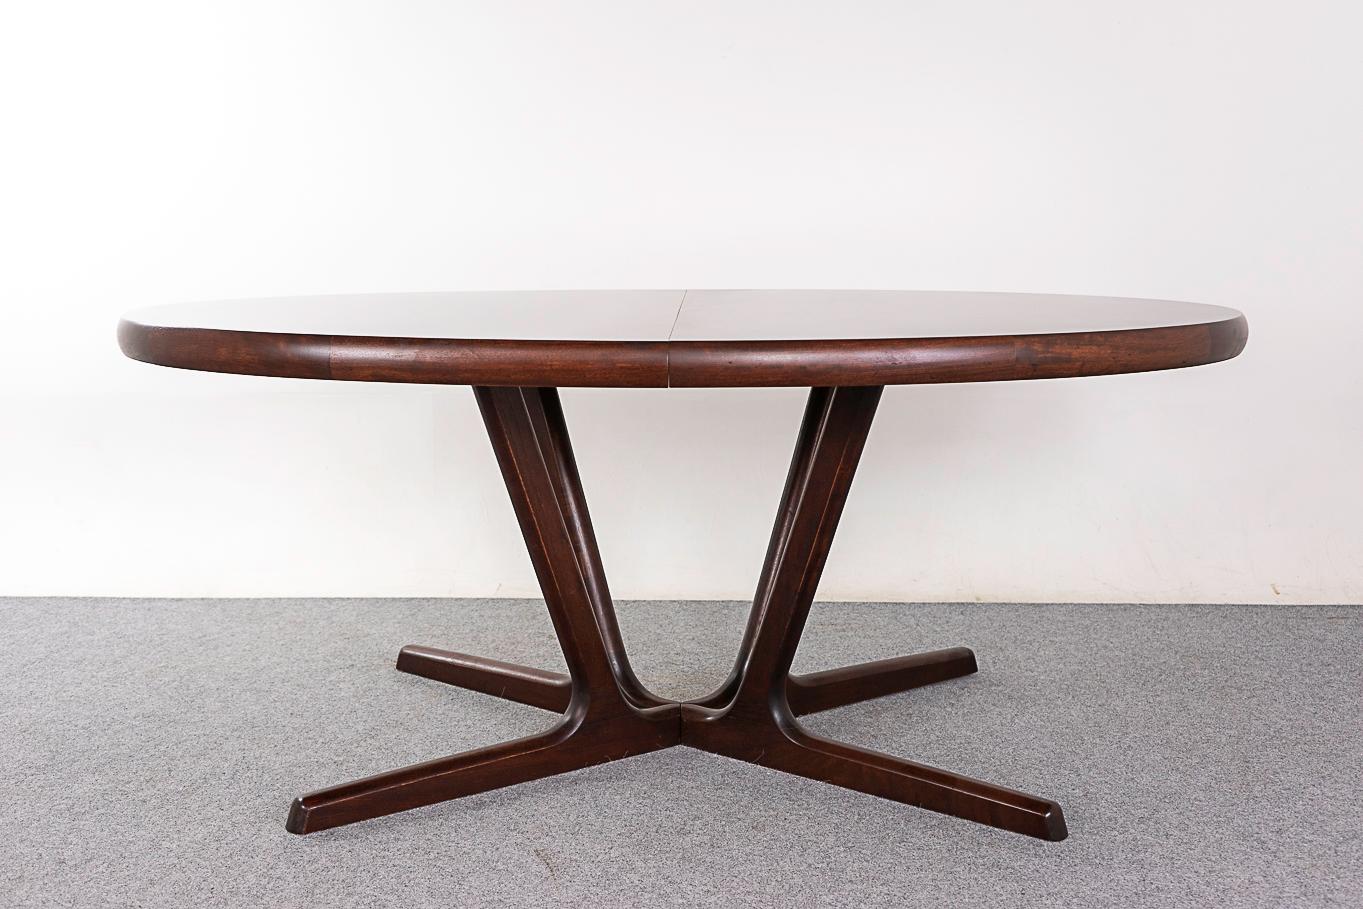 Rosewood mid-century dining table, circa 1960's. Oval top rests upon sculpted solid wood pedestal. Base extends along with the top, increasing stability when expanded. Highly figured veneer and curved solid edges. Robust, yet elegant!   

68